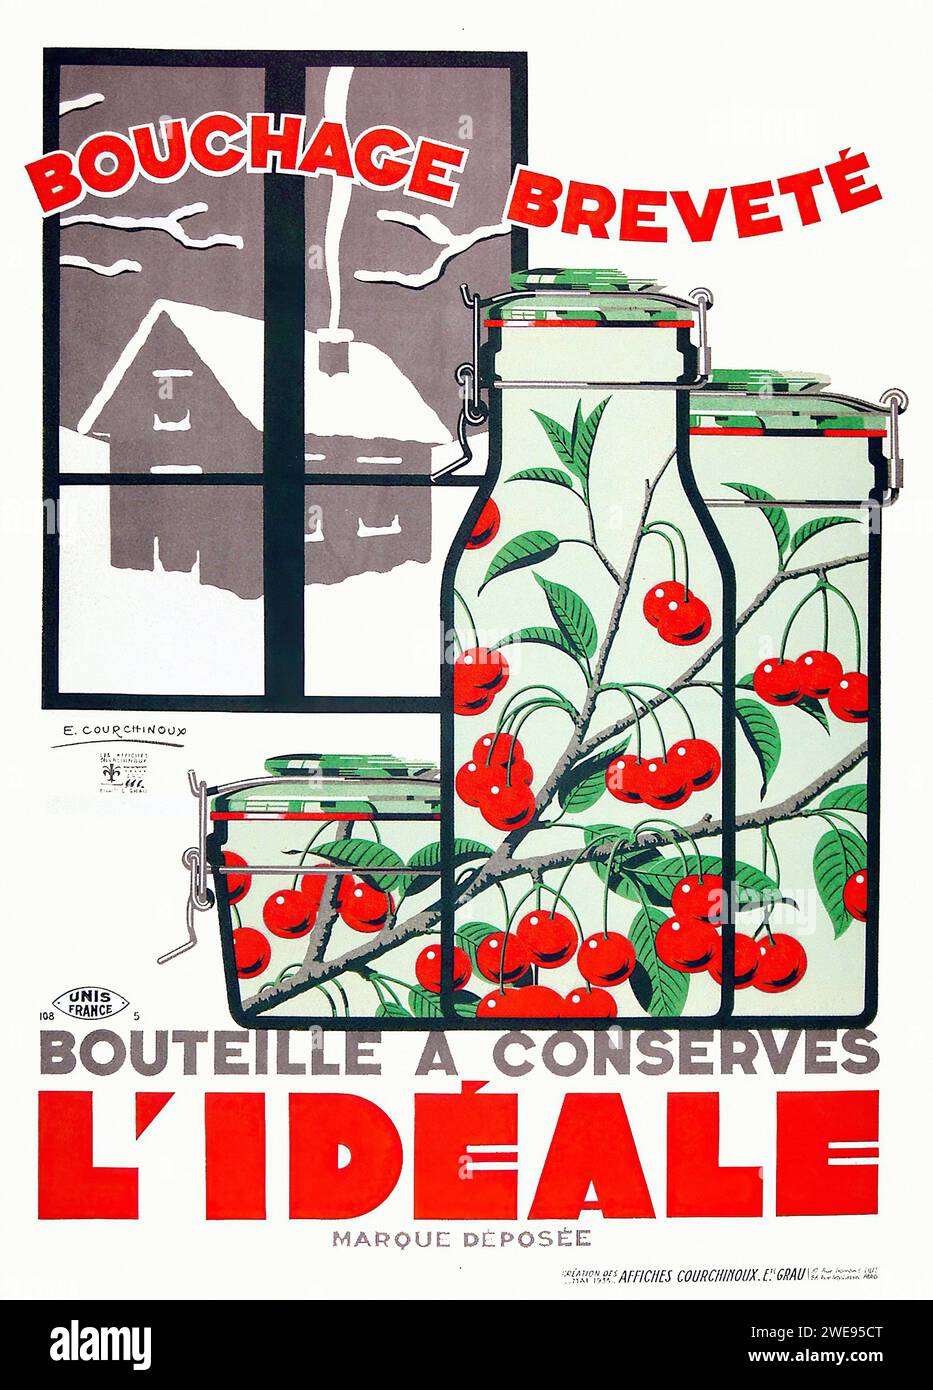 'BOUCHAGE BREVETE L'IDEALE' ['PATENTED CLOSURE THE IDEAL'] Vintage French Advertising illustrating jars of preserved cherries with a patented closure system. The graphic design is straightforward and functional, with a focus on the product's features. The use of red, green, and black creates a striking contrast against the plain background. Stock Photo